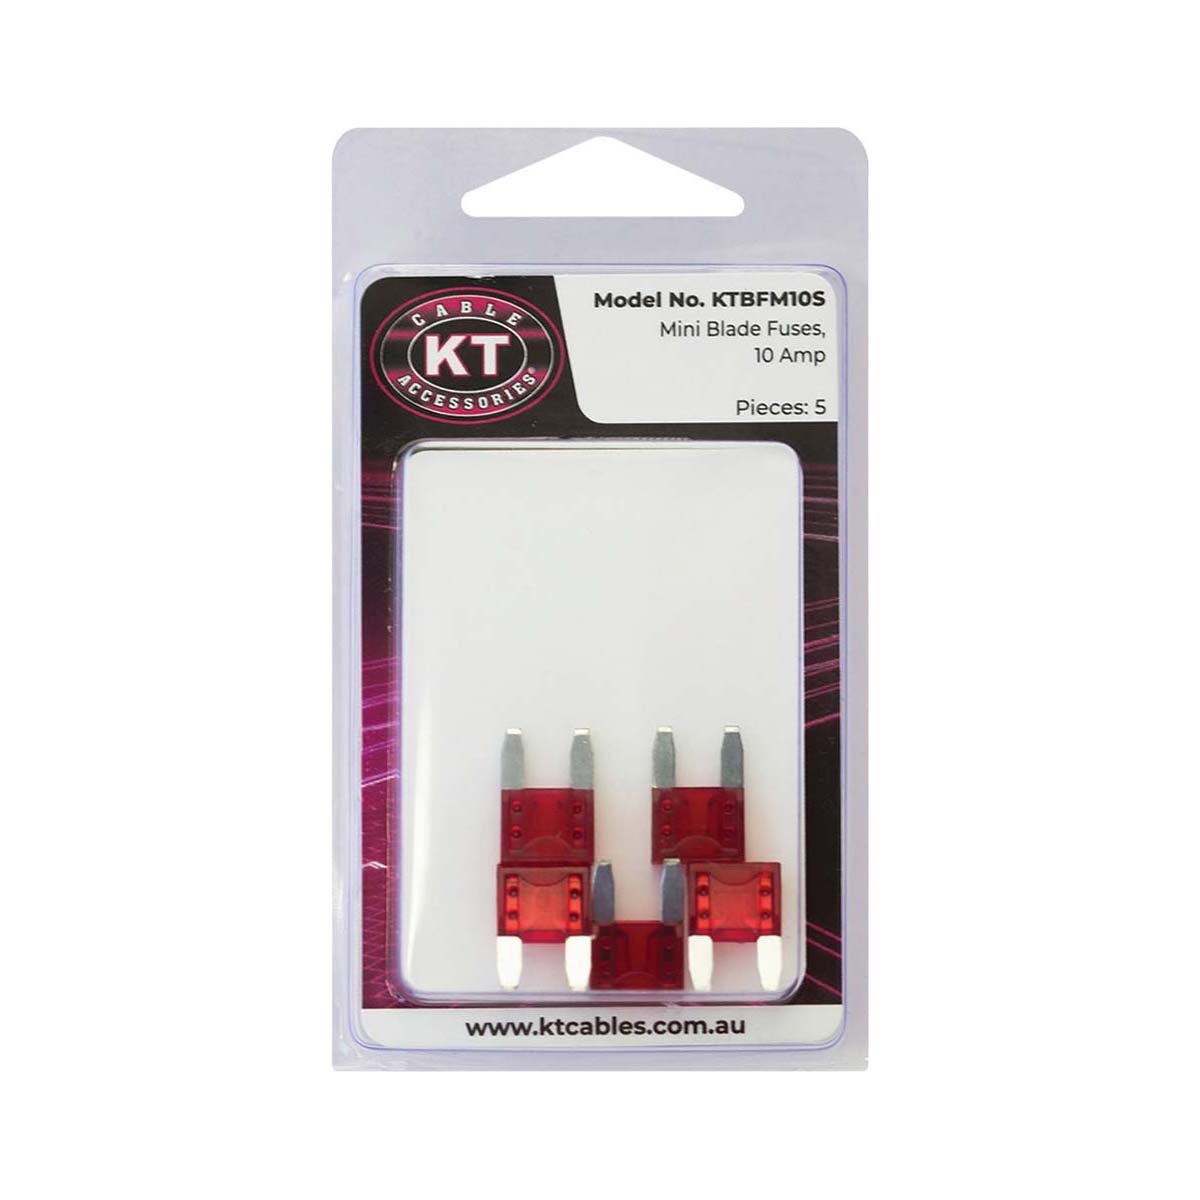 KT Cables Mini Blade Fuse 5 Pack 20amp